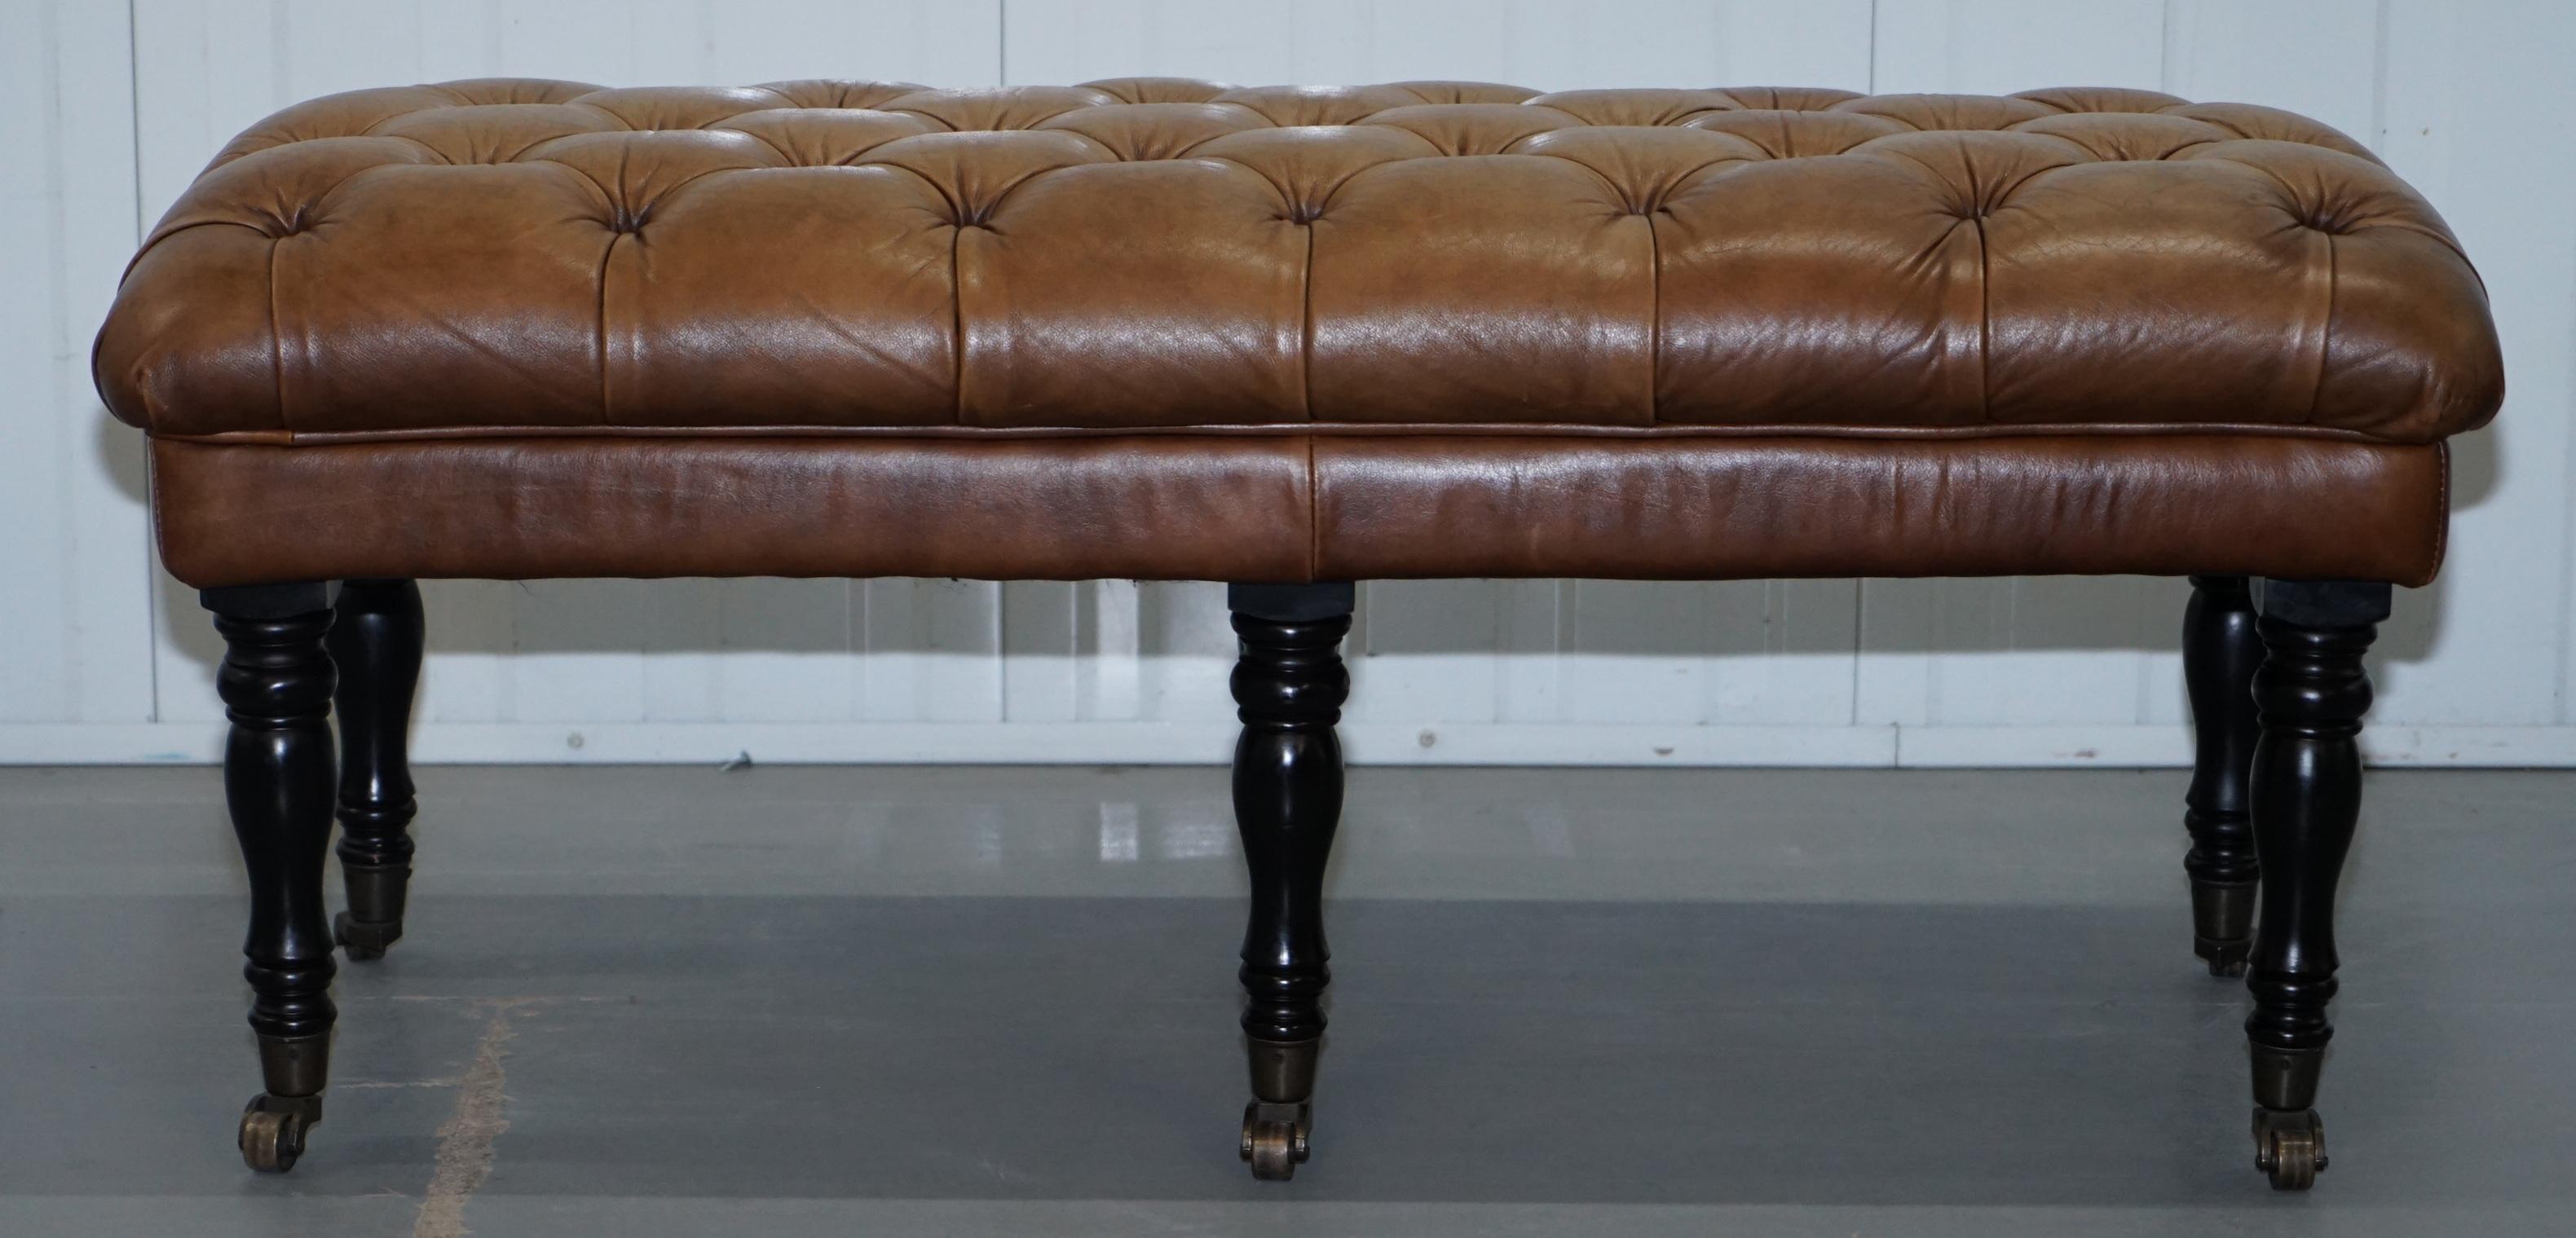 Contemporary Chesterfield Aged Tan Brown Leather Chesterfield Bench Stool on Wood Turned Legs